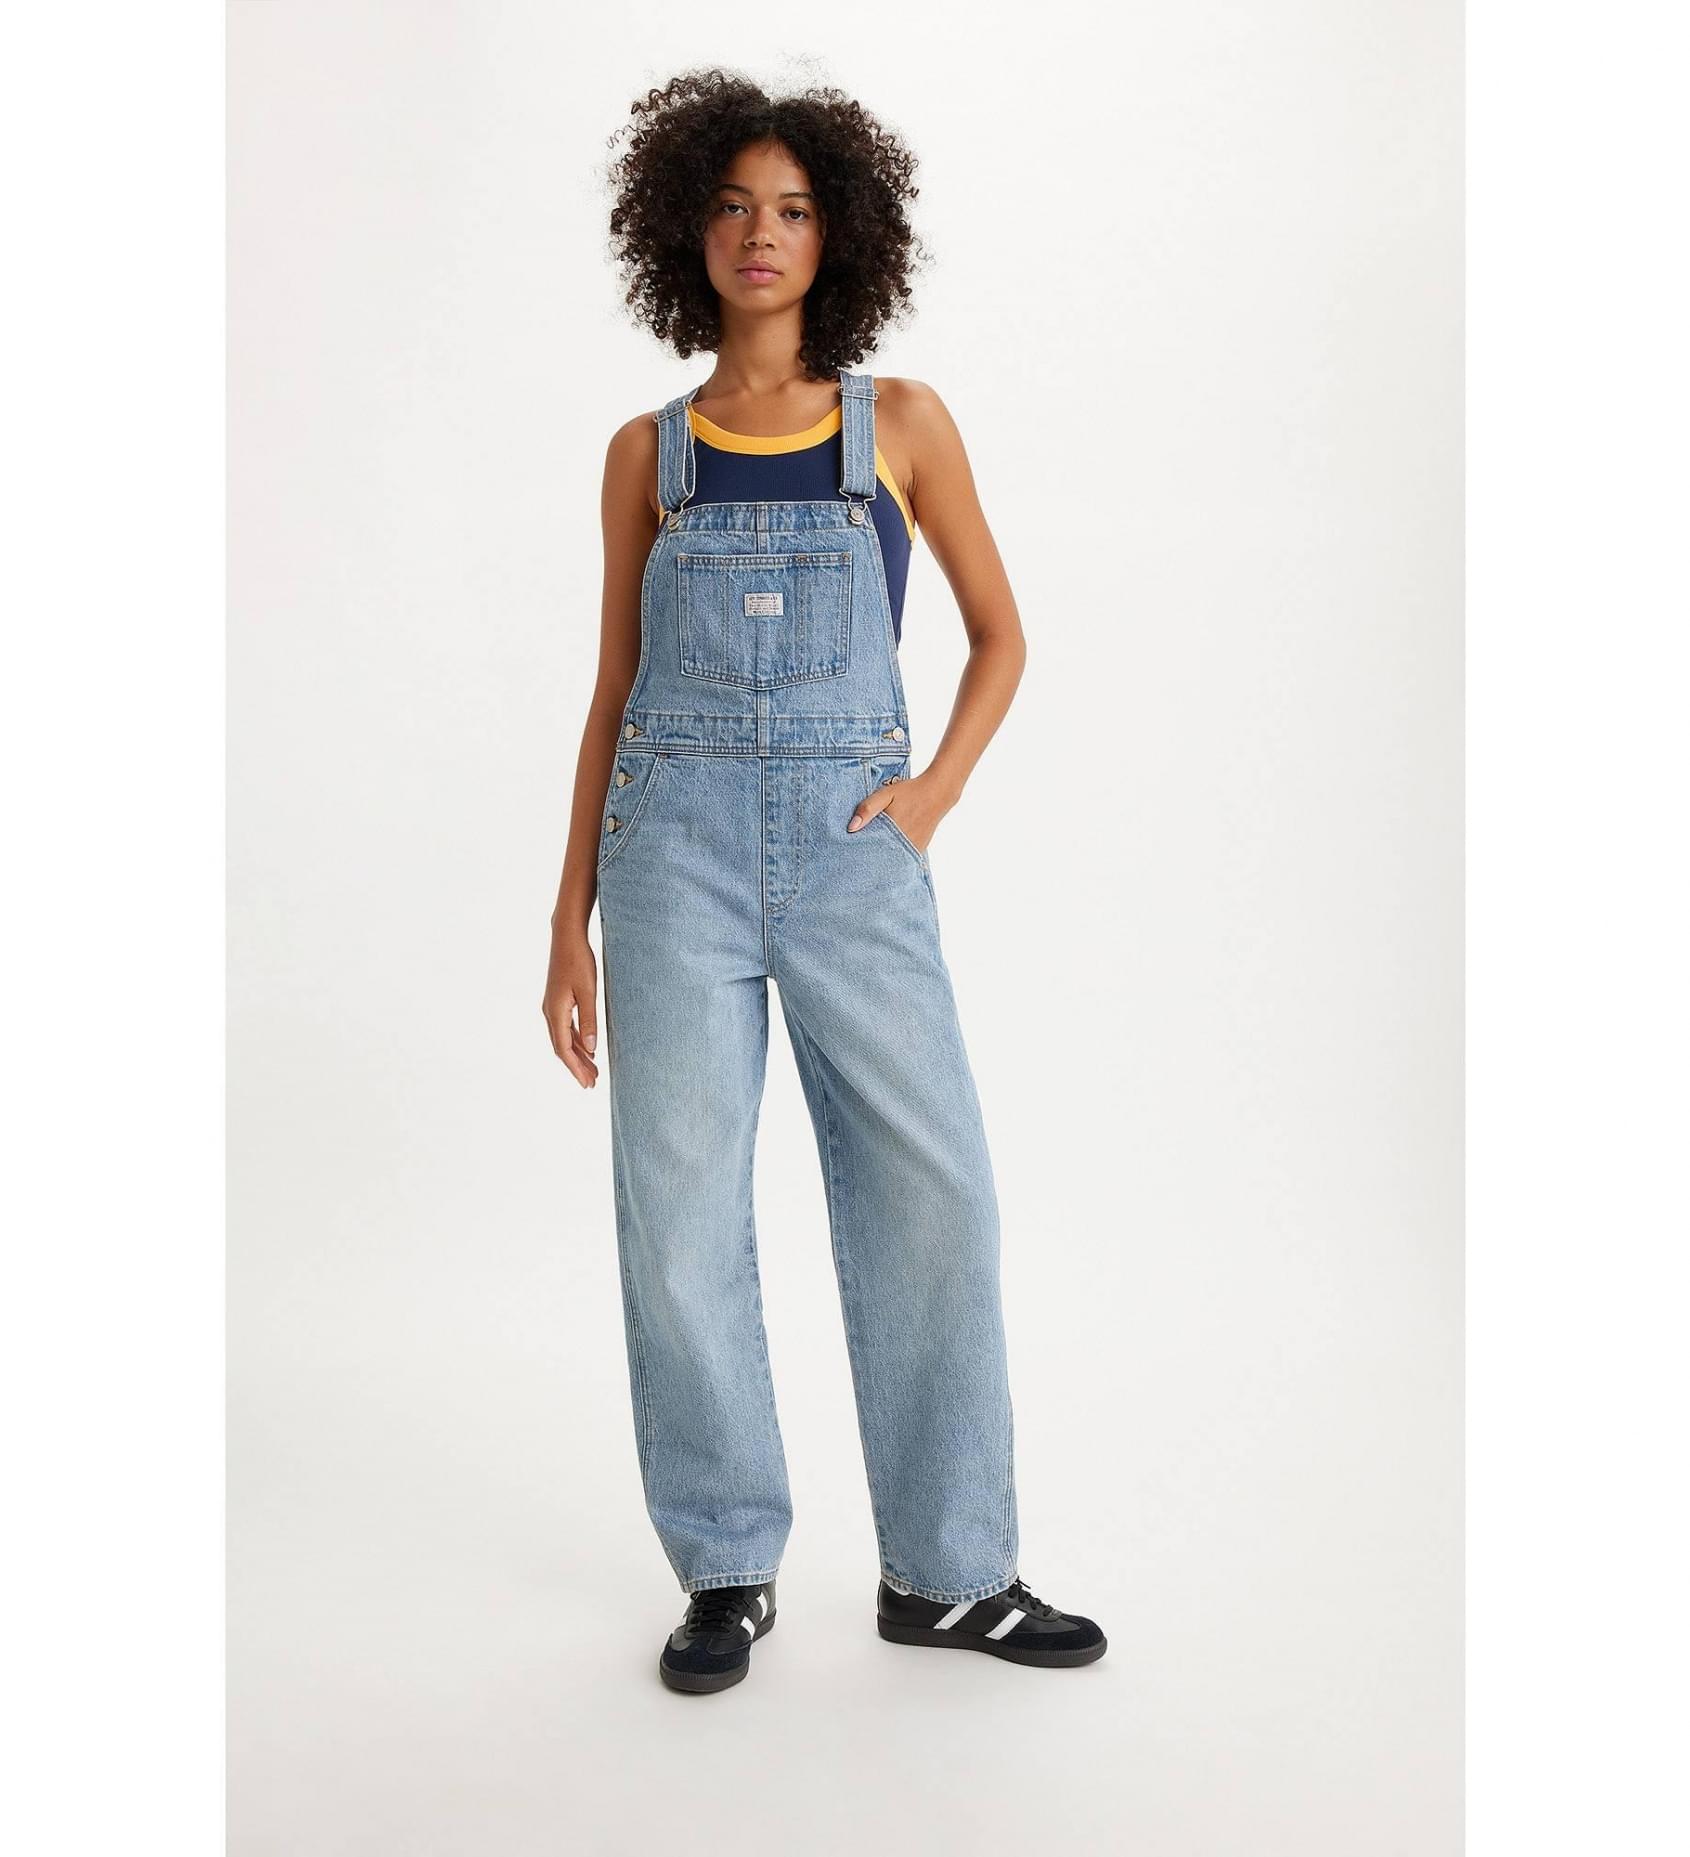 Vintage Denim Overall - Levi's Jeans, Jackets & Clothing